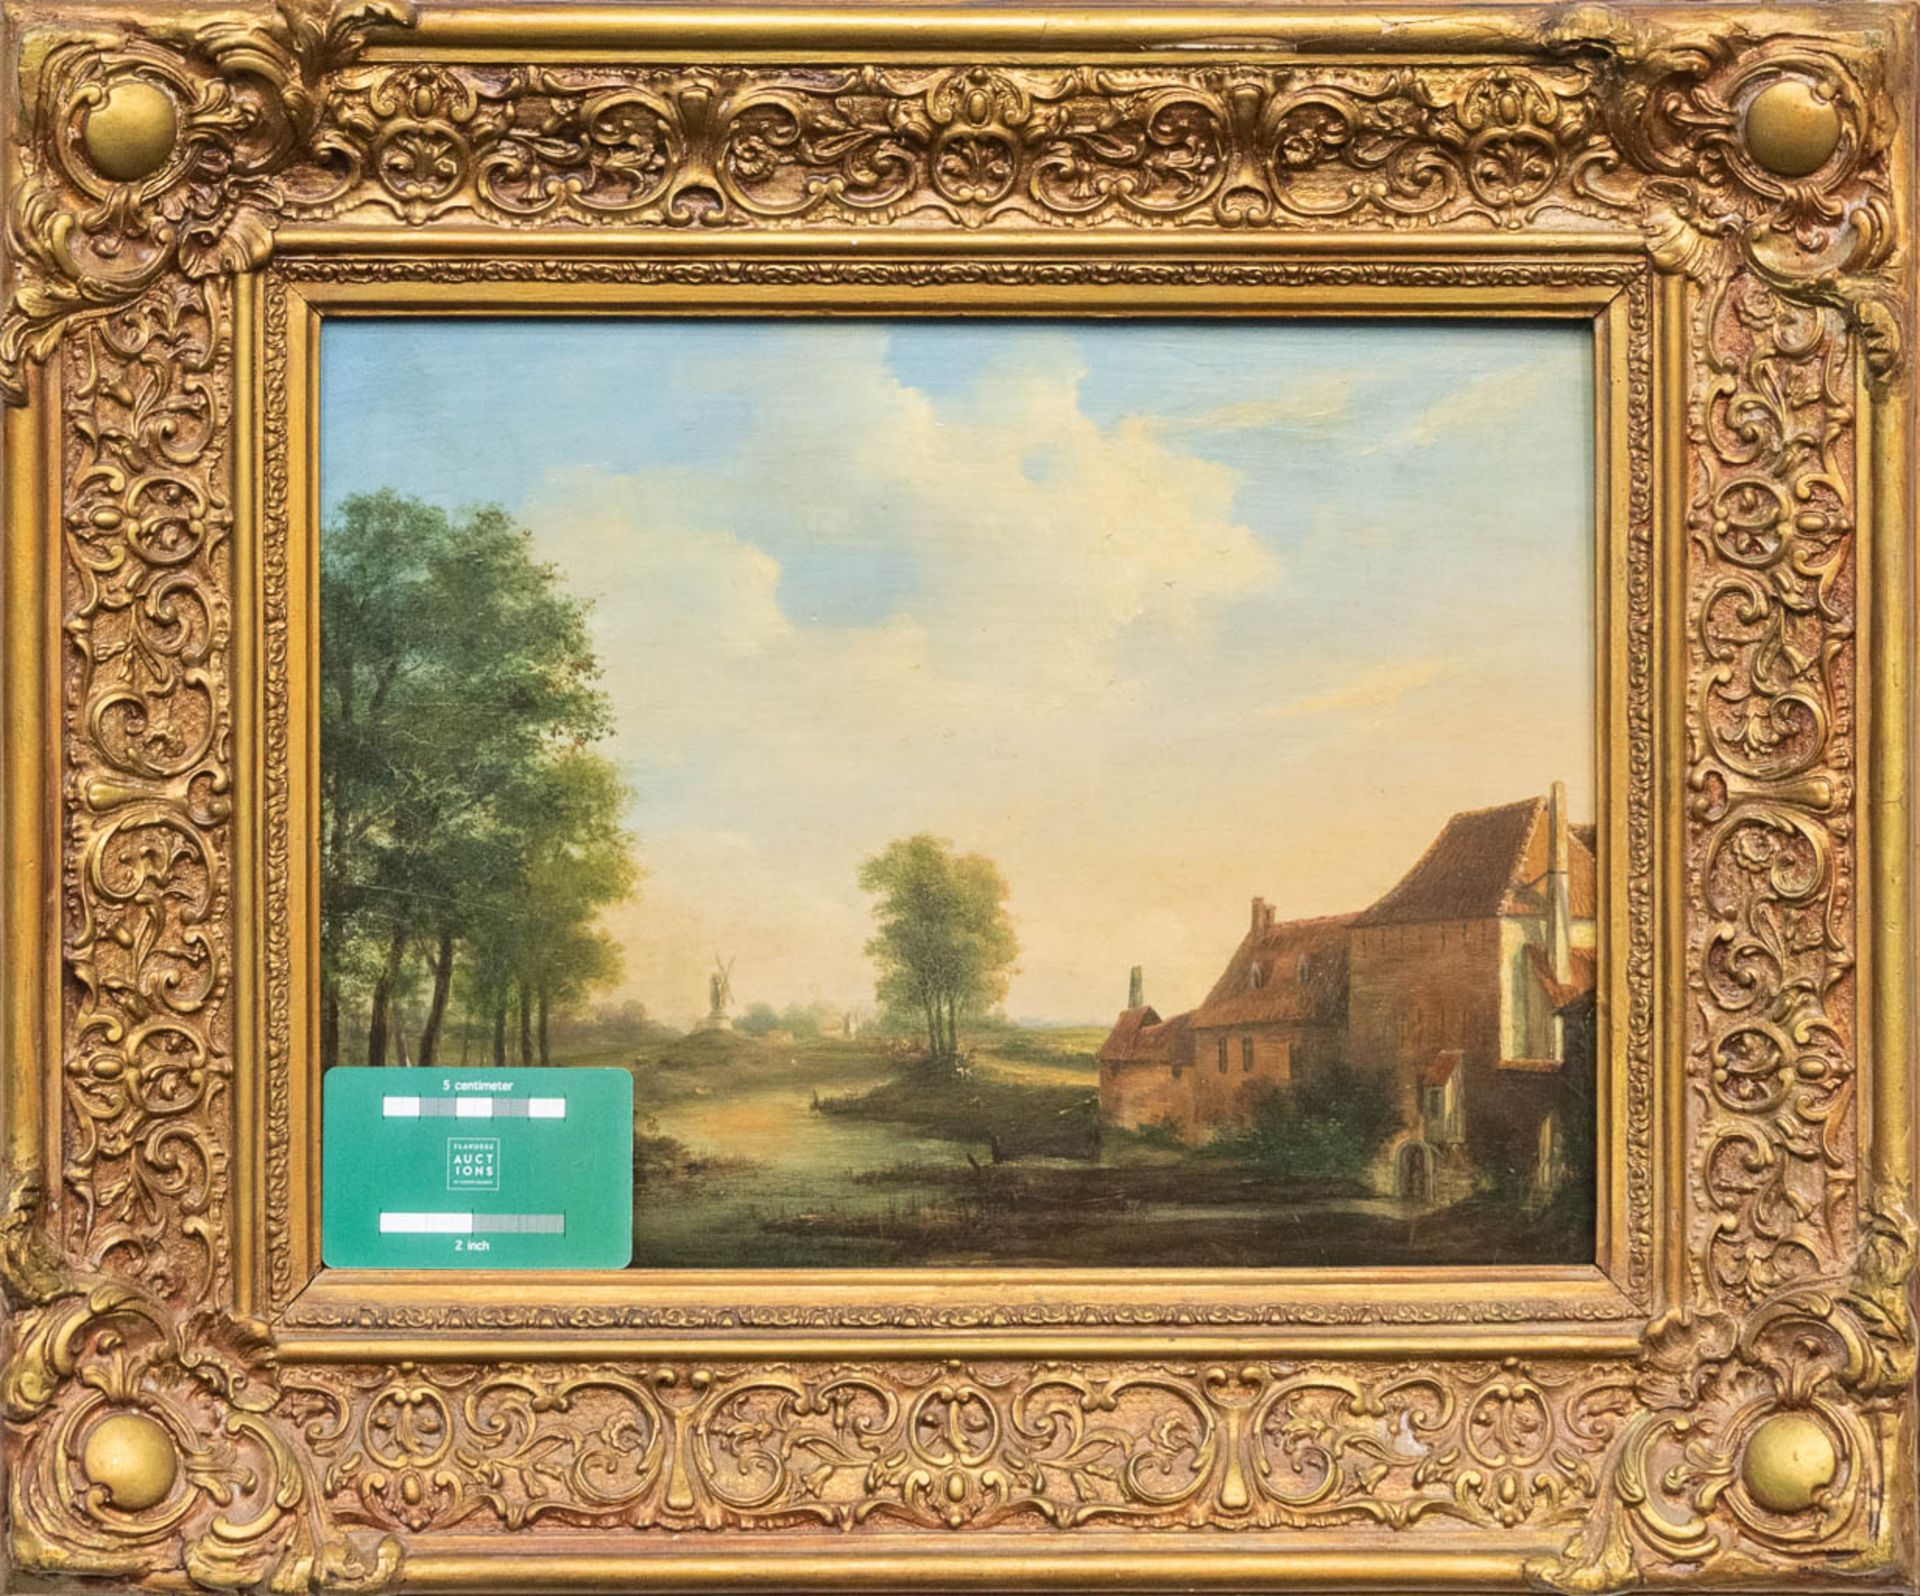 No signature found, an antique painting of The Dutch School, landscape with windmill, oil on canvas. - Image 3 of 5